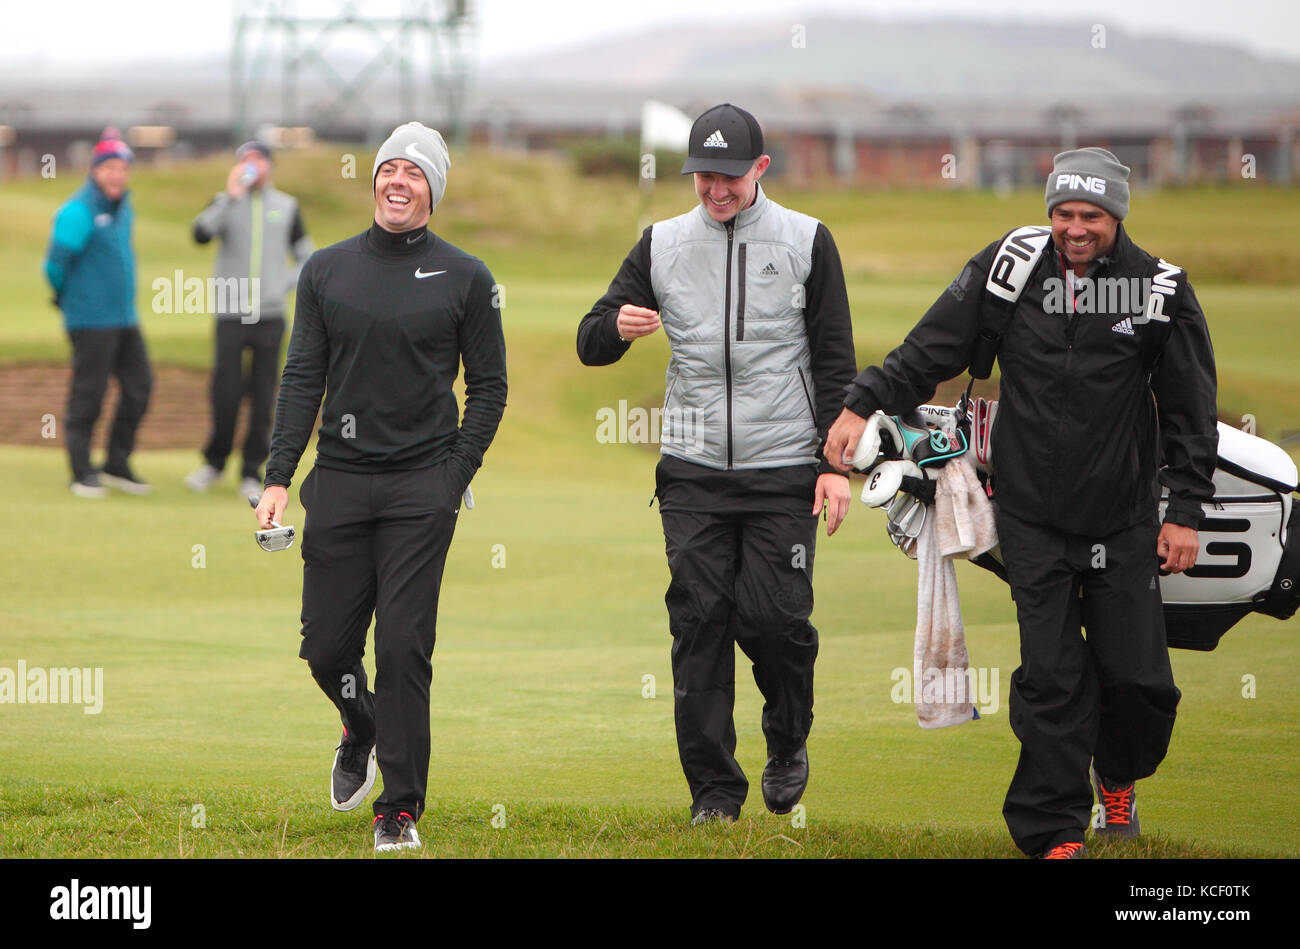 St Andrews, Fife, Scotland, UK. 4th October, 2017. The Alfred Dunhill Links Golf Championship. Rory McIlroy, and Connor Syme play a pratice round at The Alfred Dunhill Links Championship;, St Andrews fife Scotland, uk Wednesday 4th of October 2017 Credit: Derek Allan/Alamy Live News Stock Photo